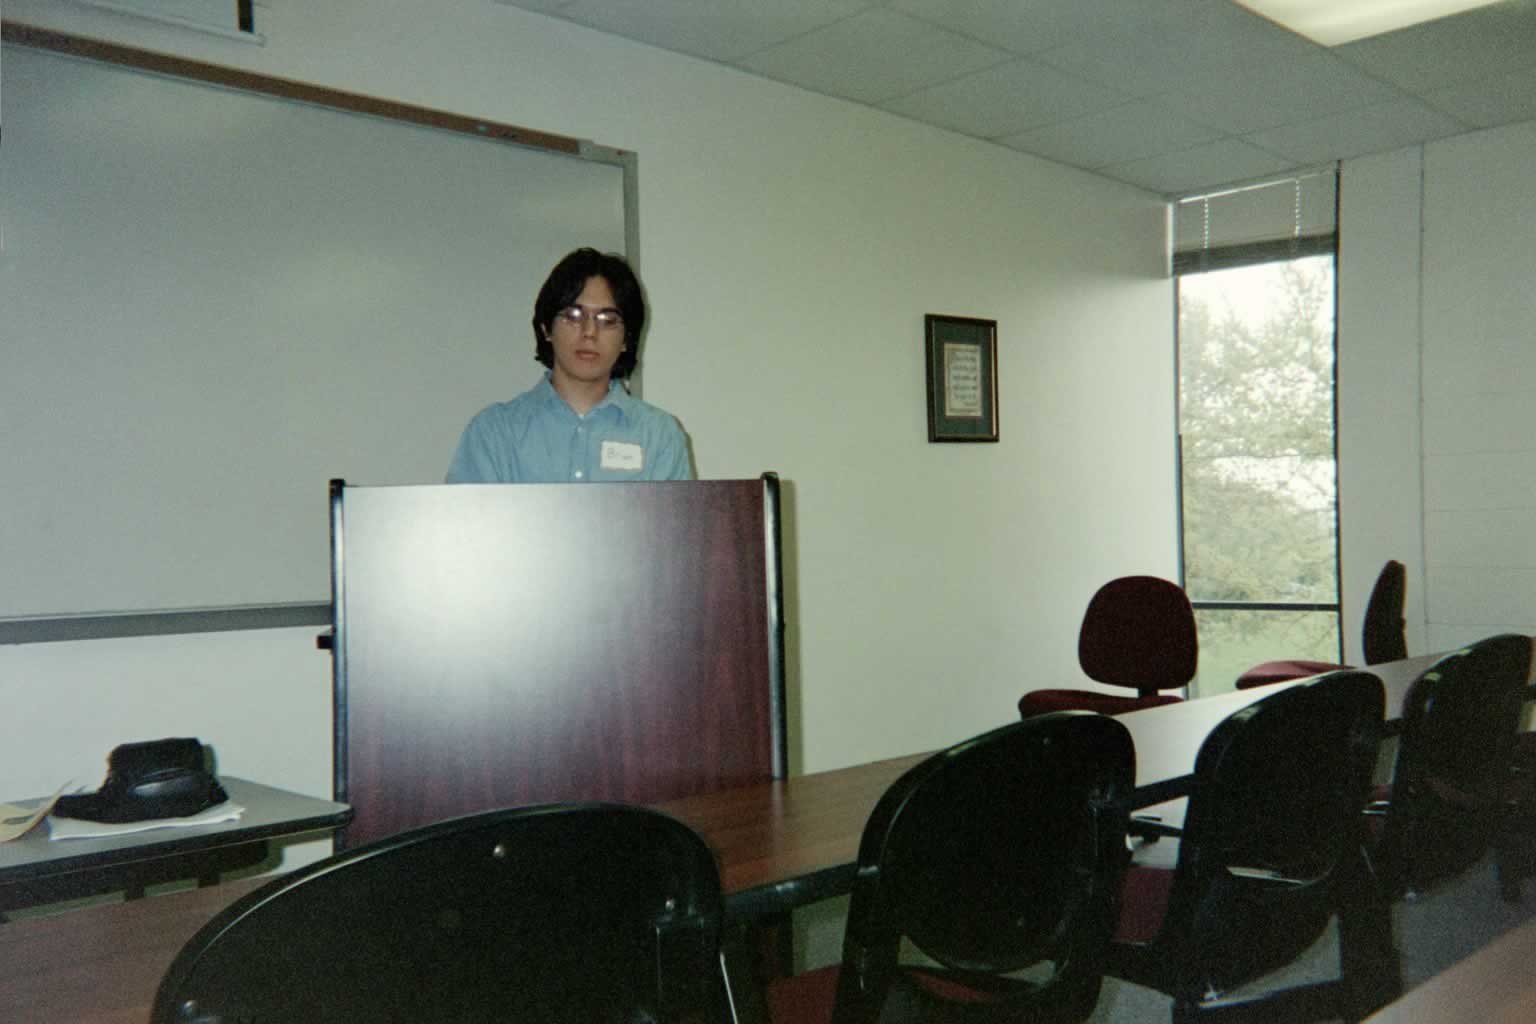 picture of a man in glasses standing behind a podium speaking